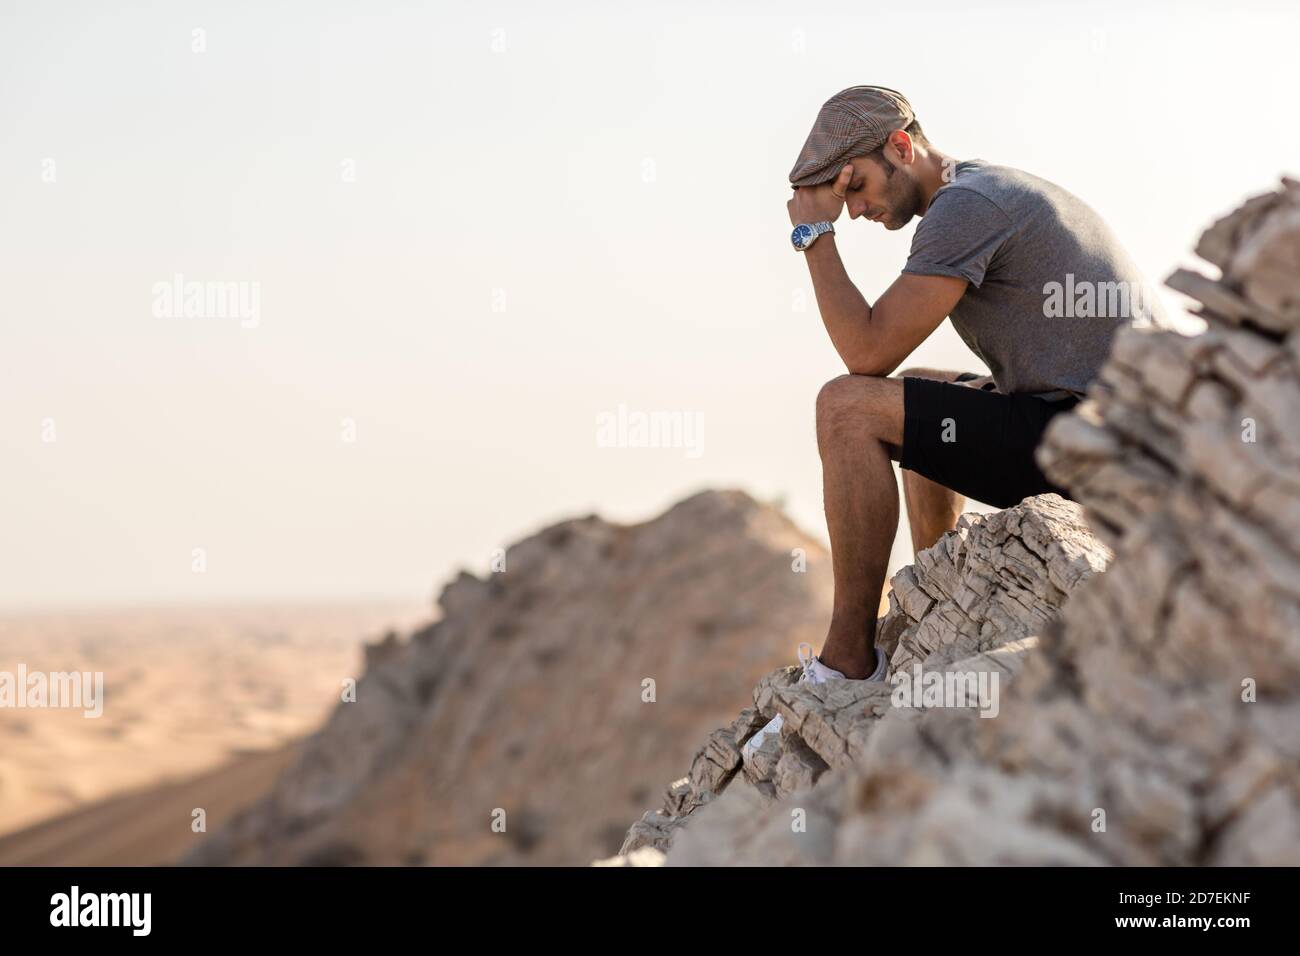 Depression and loneliness. Sad young man sitting alone on top of a mountain cliff overlooking the desert. Stock Photo